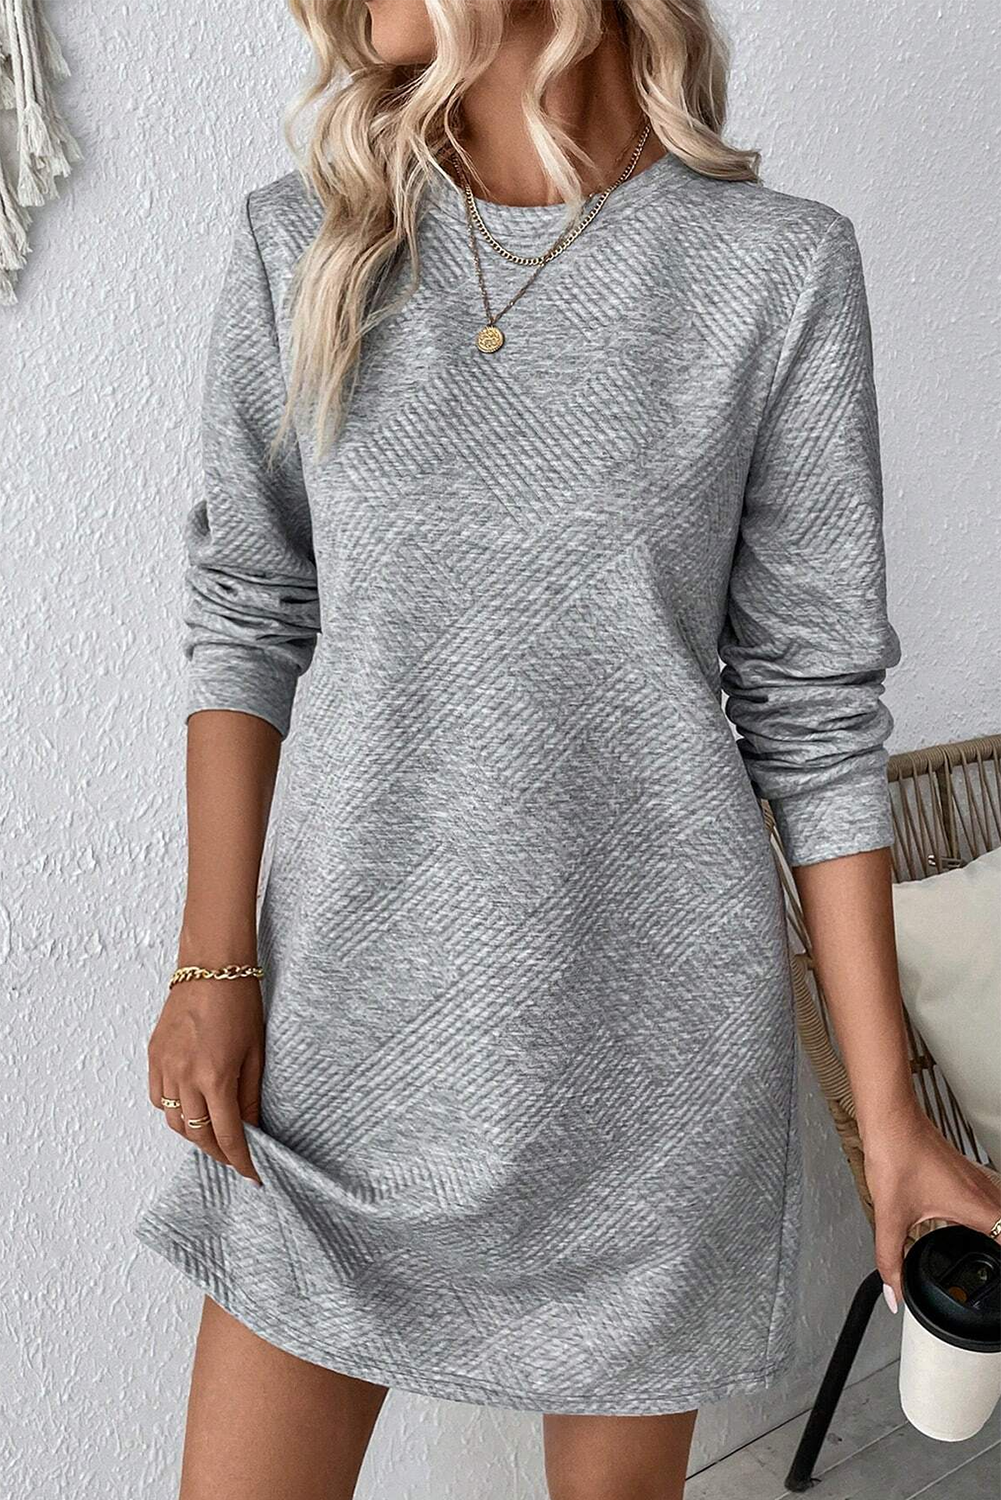 Gray Solid Color Textured Long Sleeve Shift Dress